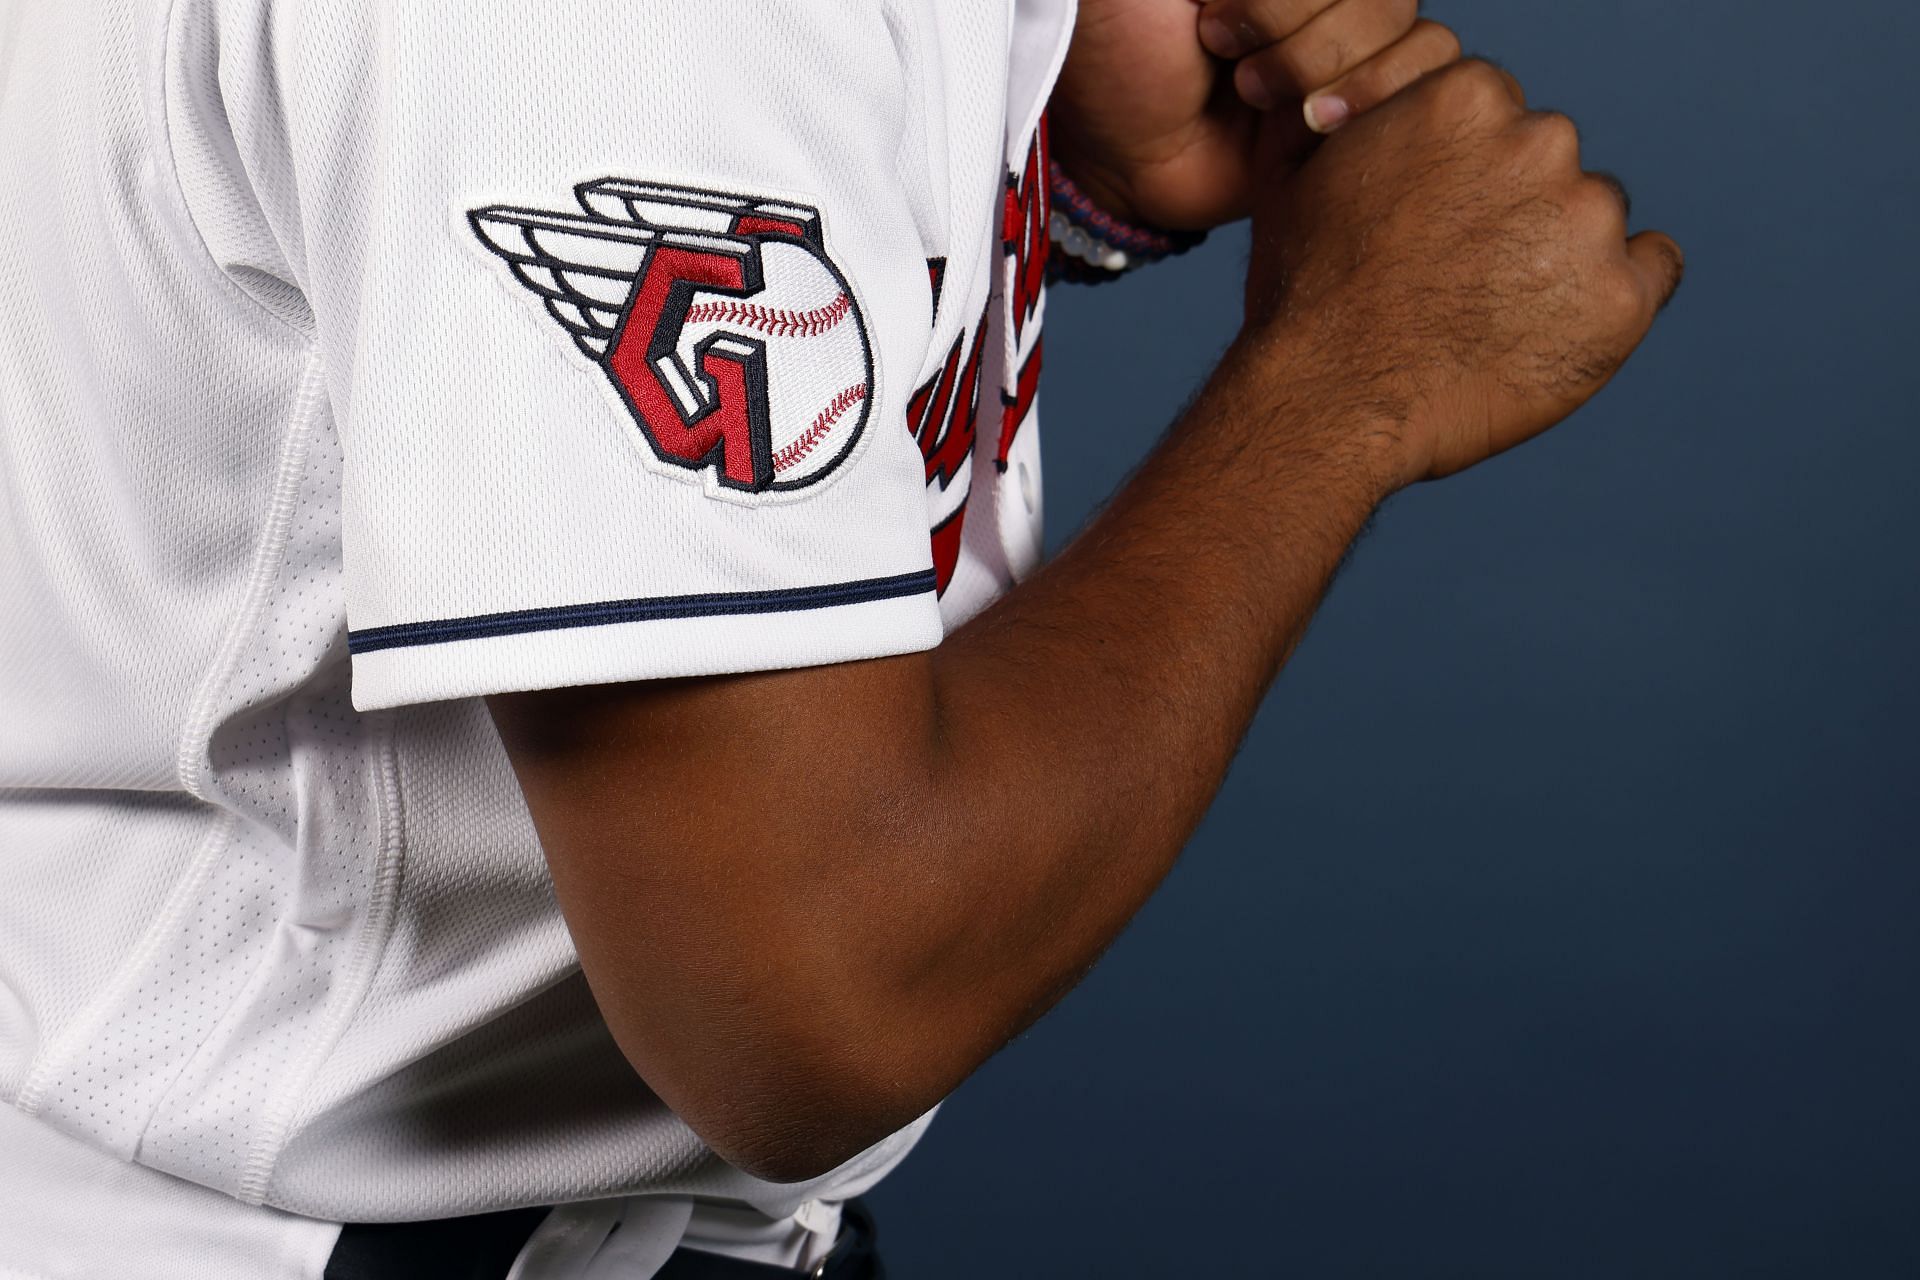 GOODYEAR, ARIZONA - MARCH 22: A detailed view of the jersey logo worn by Jose Tena #75 of the Cleveland Guardians during a photo day at Goodyear Stadium in Goodyear, Arizona on March 22, 2022. Photo by Chris Coduto/Getty Images)